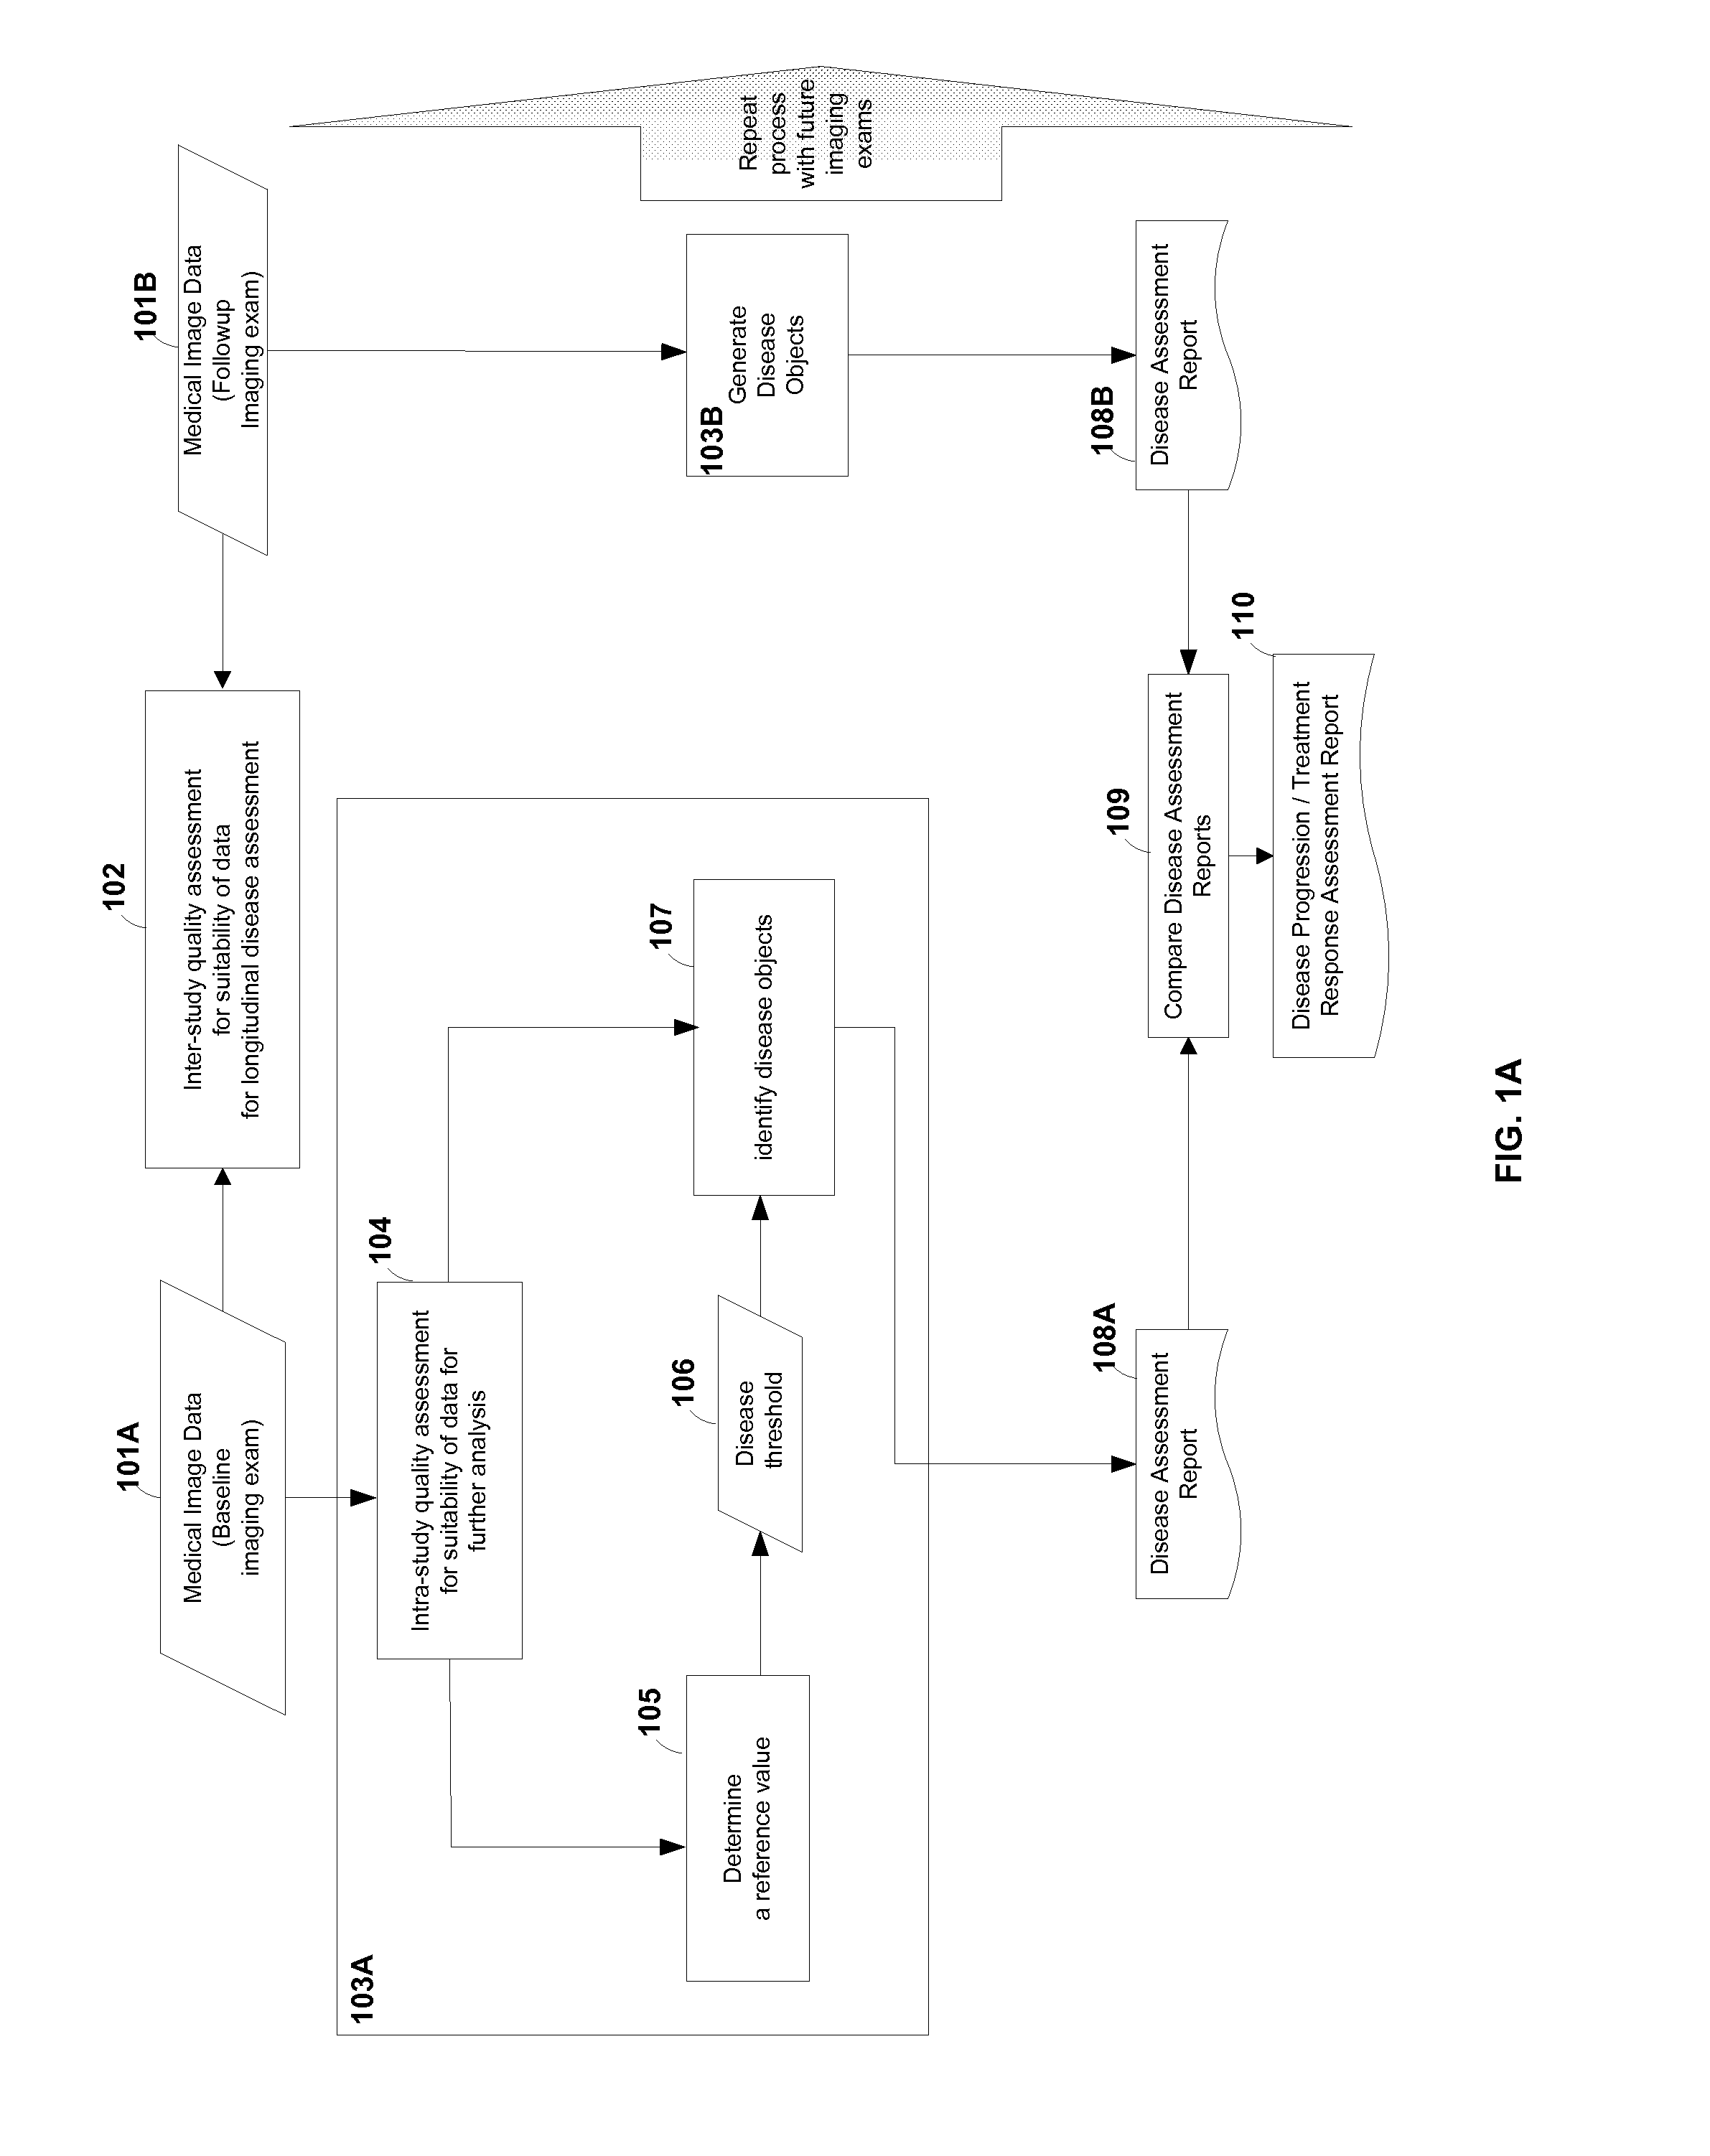 Computer-aided detection (CAD) system for personalized disease detection, assessment, and tracking, in medical imaging based on user selectable criteria